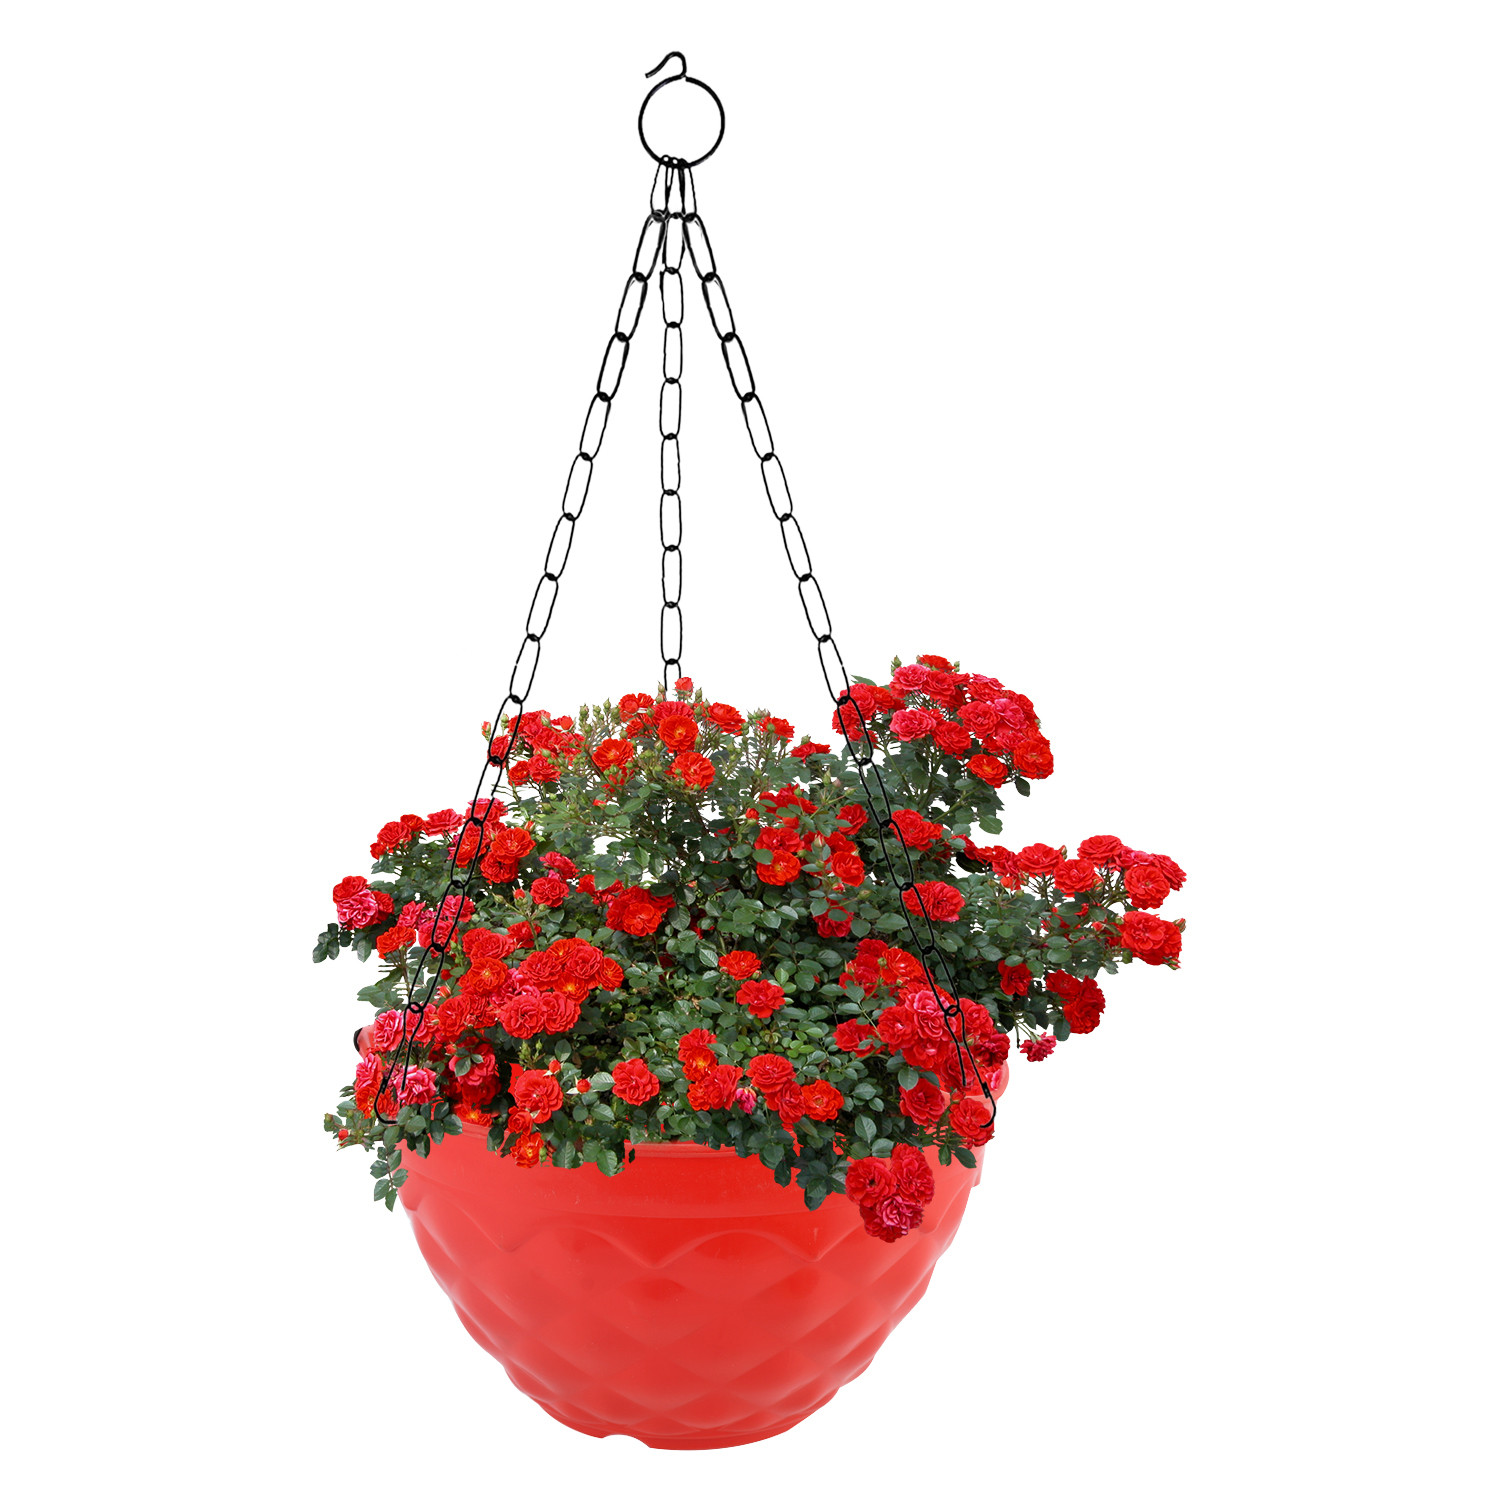 Kuber Industries Diamond Flower Pot|Durable Plastic Hanging Basket Flower Planter with Chain for Home|Garden|Balcony|Pack of 2 (Red & White)